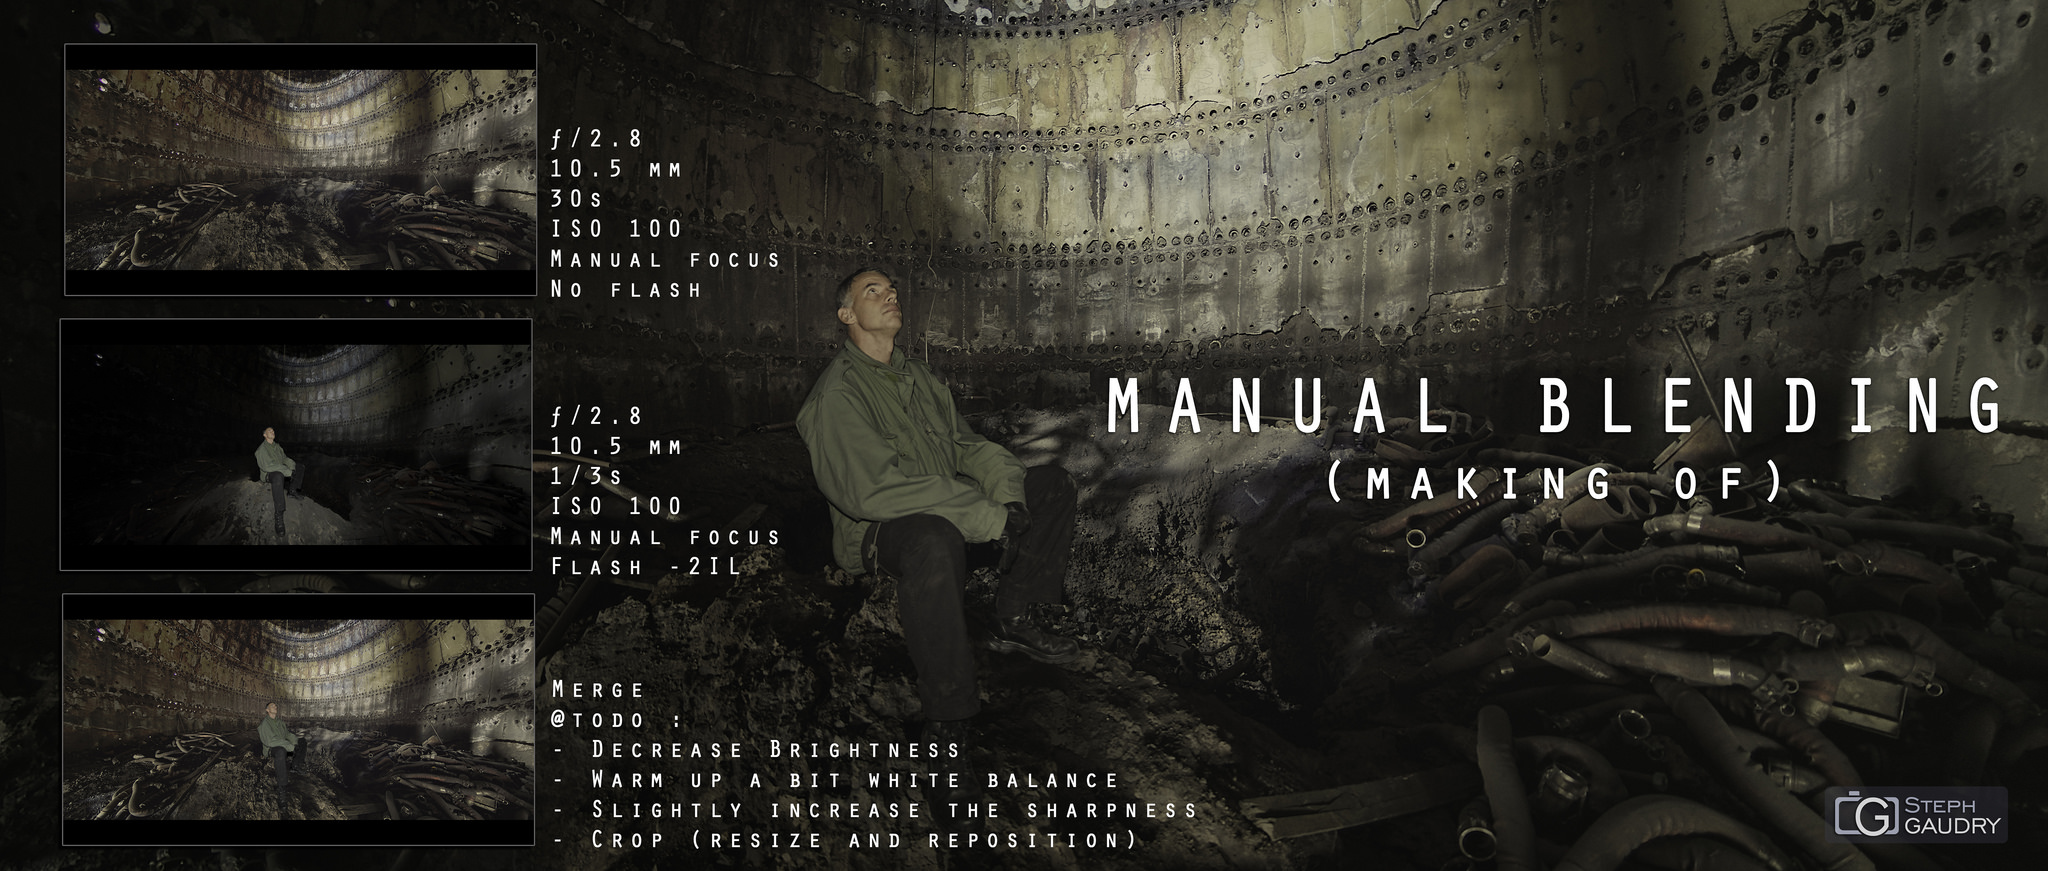 Manual blending - Making of (Trapped into the beast) [Cliquez pour lancer le diaporama]